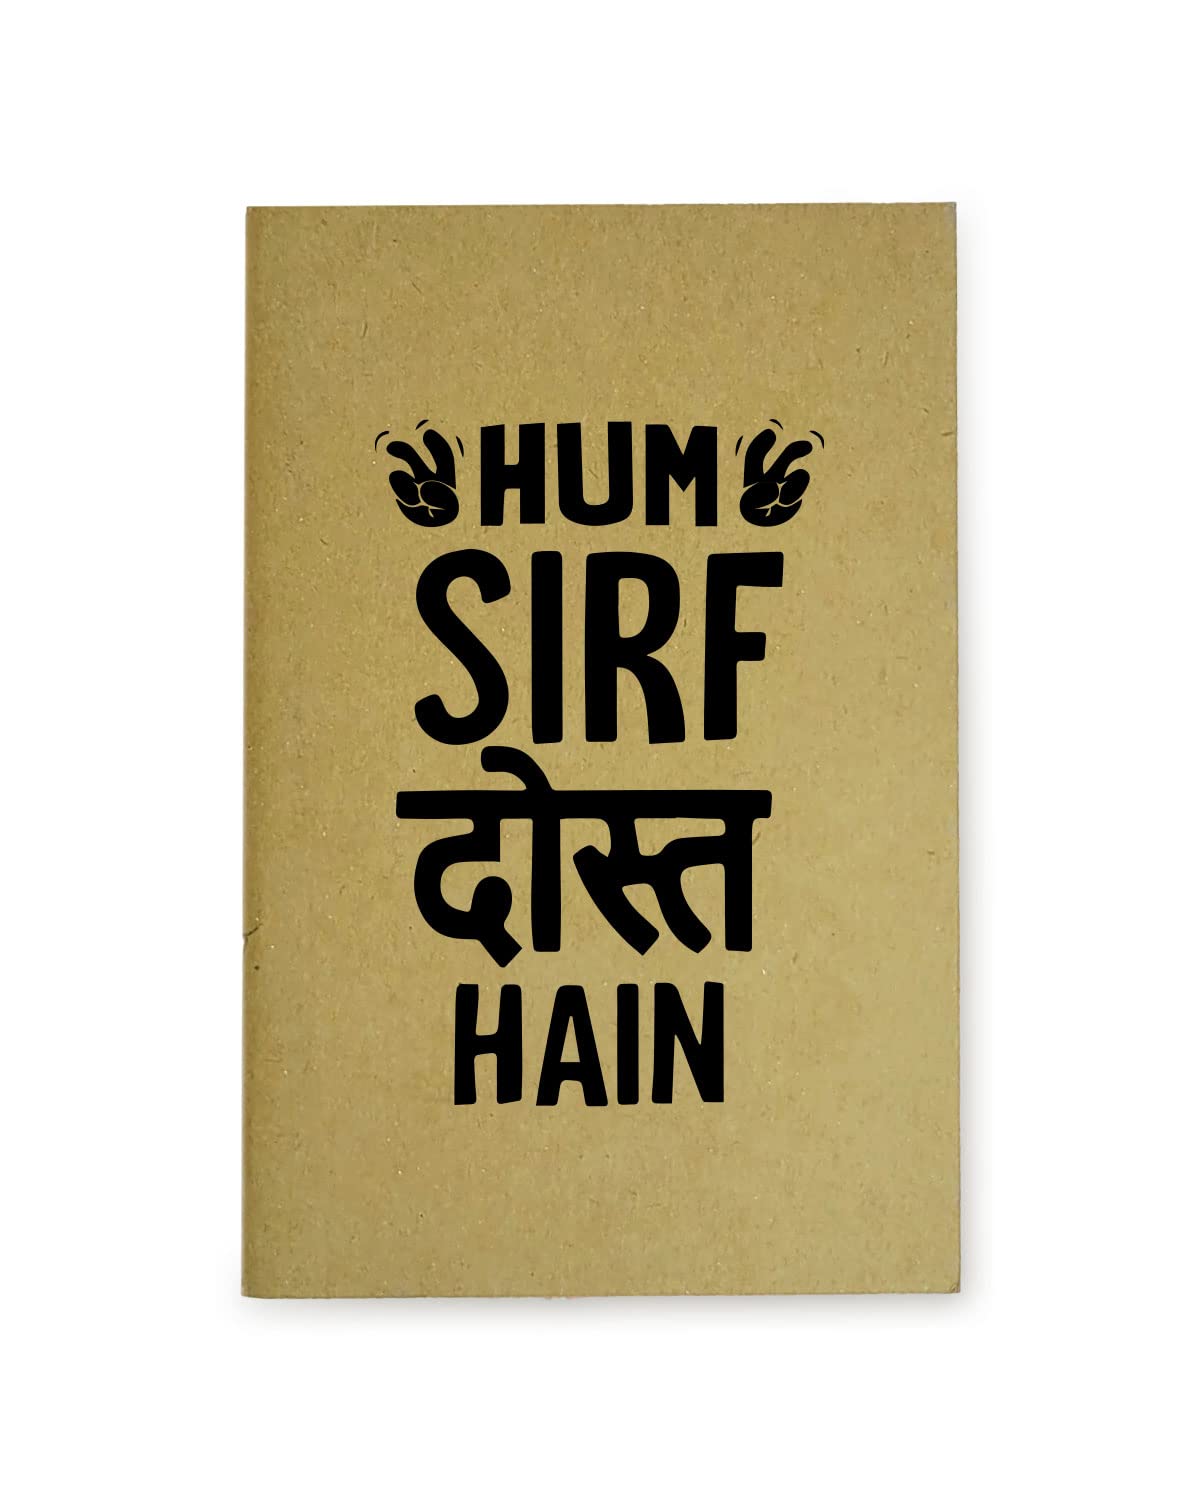 Hum Sirf Dost Hain - Brown A5 Doodle Notebook - Kraft Cover Notebook - A5 - 300 GSM Kraft Cover - Handmade - Unruled - 80 Pages - Natural Shade Pages 120 GSM - Funny Quotes & Quirky, Funky designs